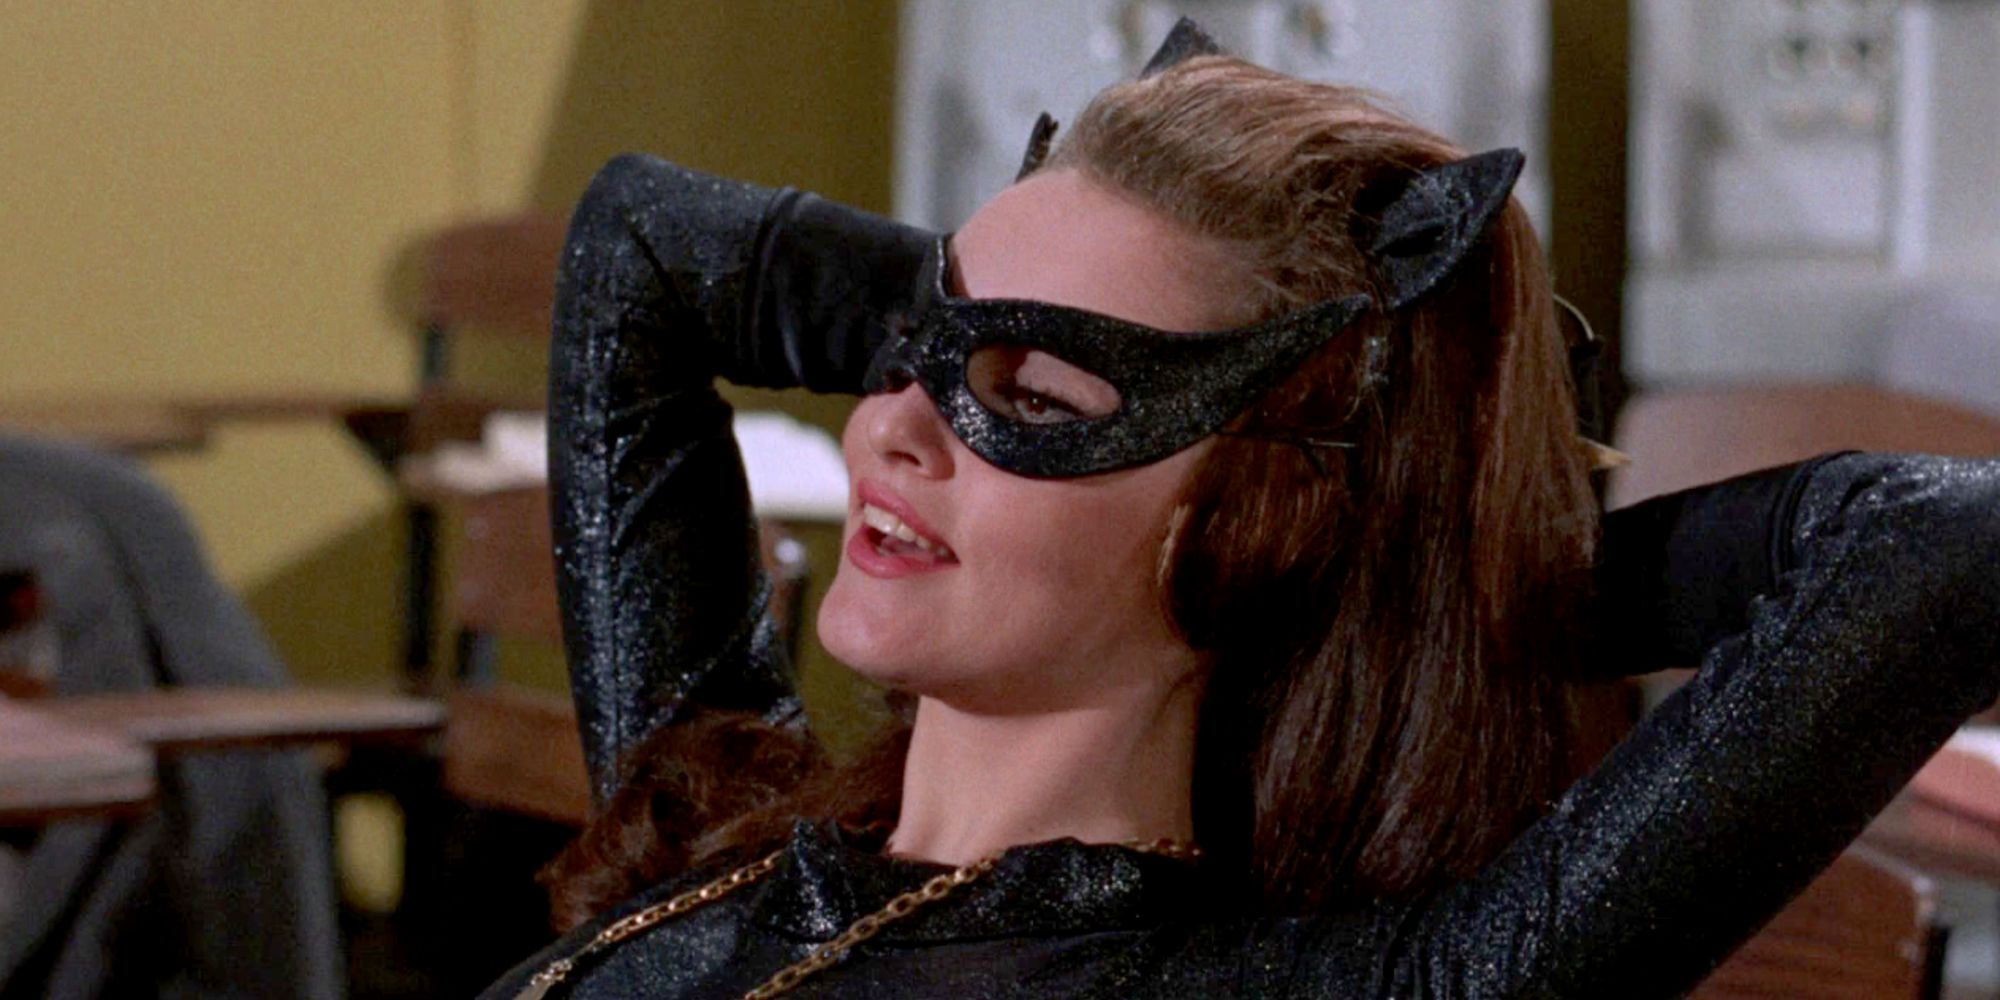 Julie Newmar as Catwoman resting in a chair in Batman 66